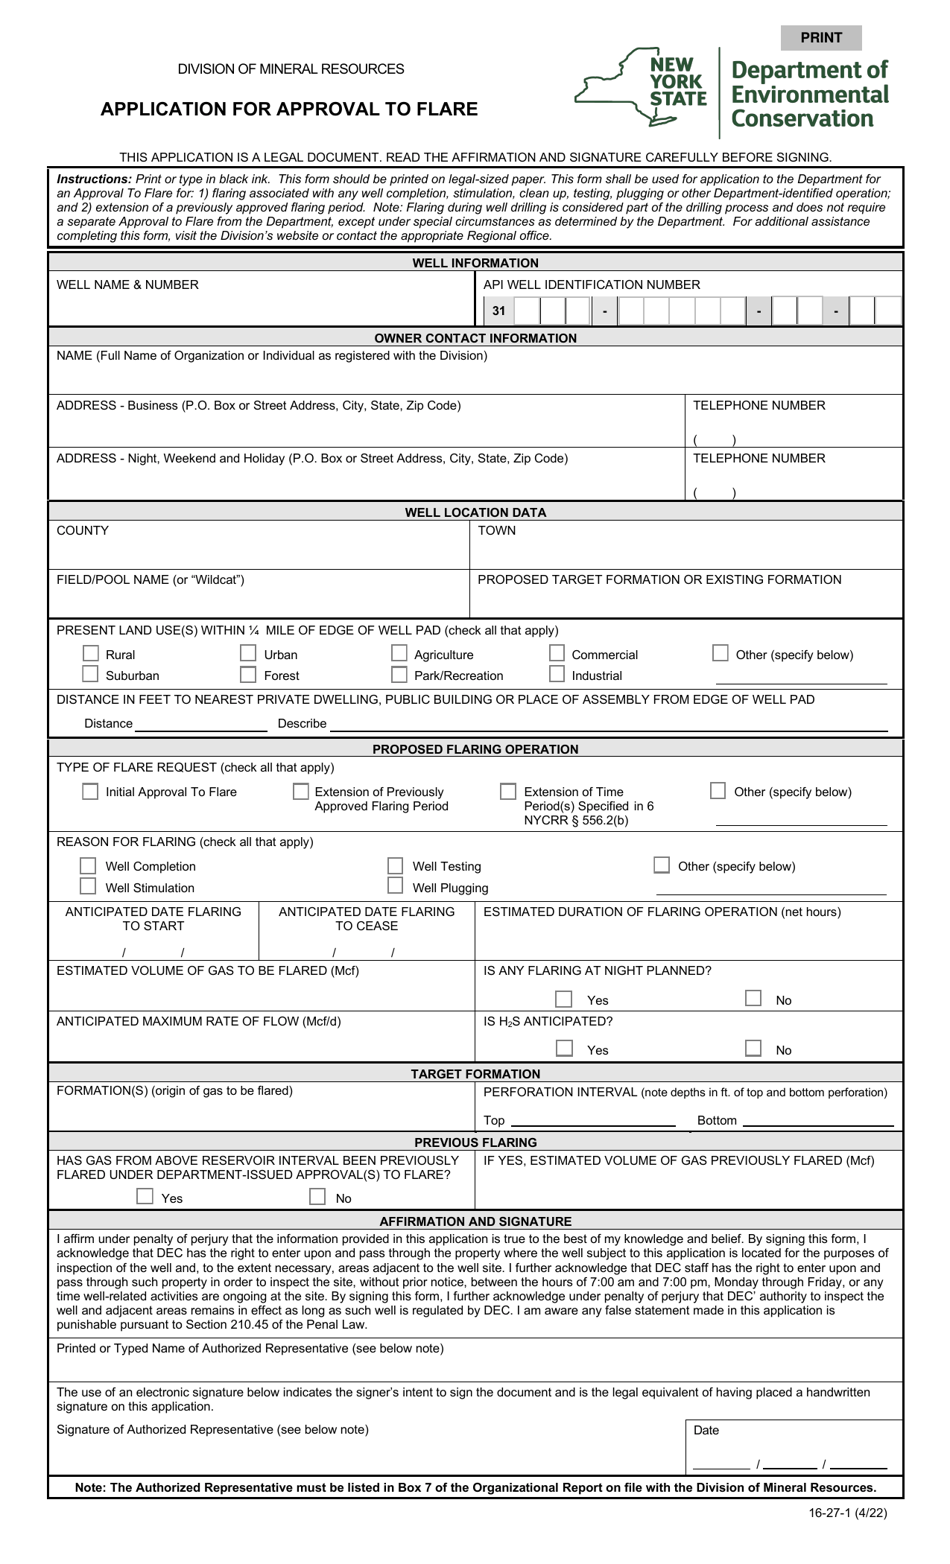 Form 16-27-1 Application for Approval to Flare - New York, Page 1